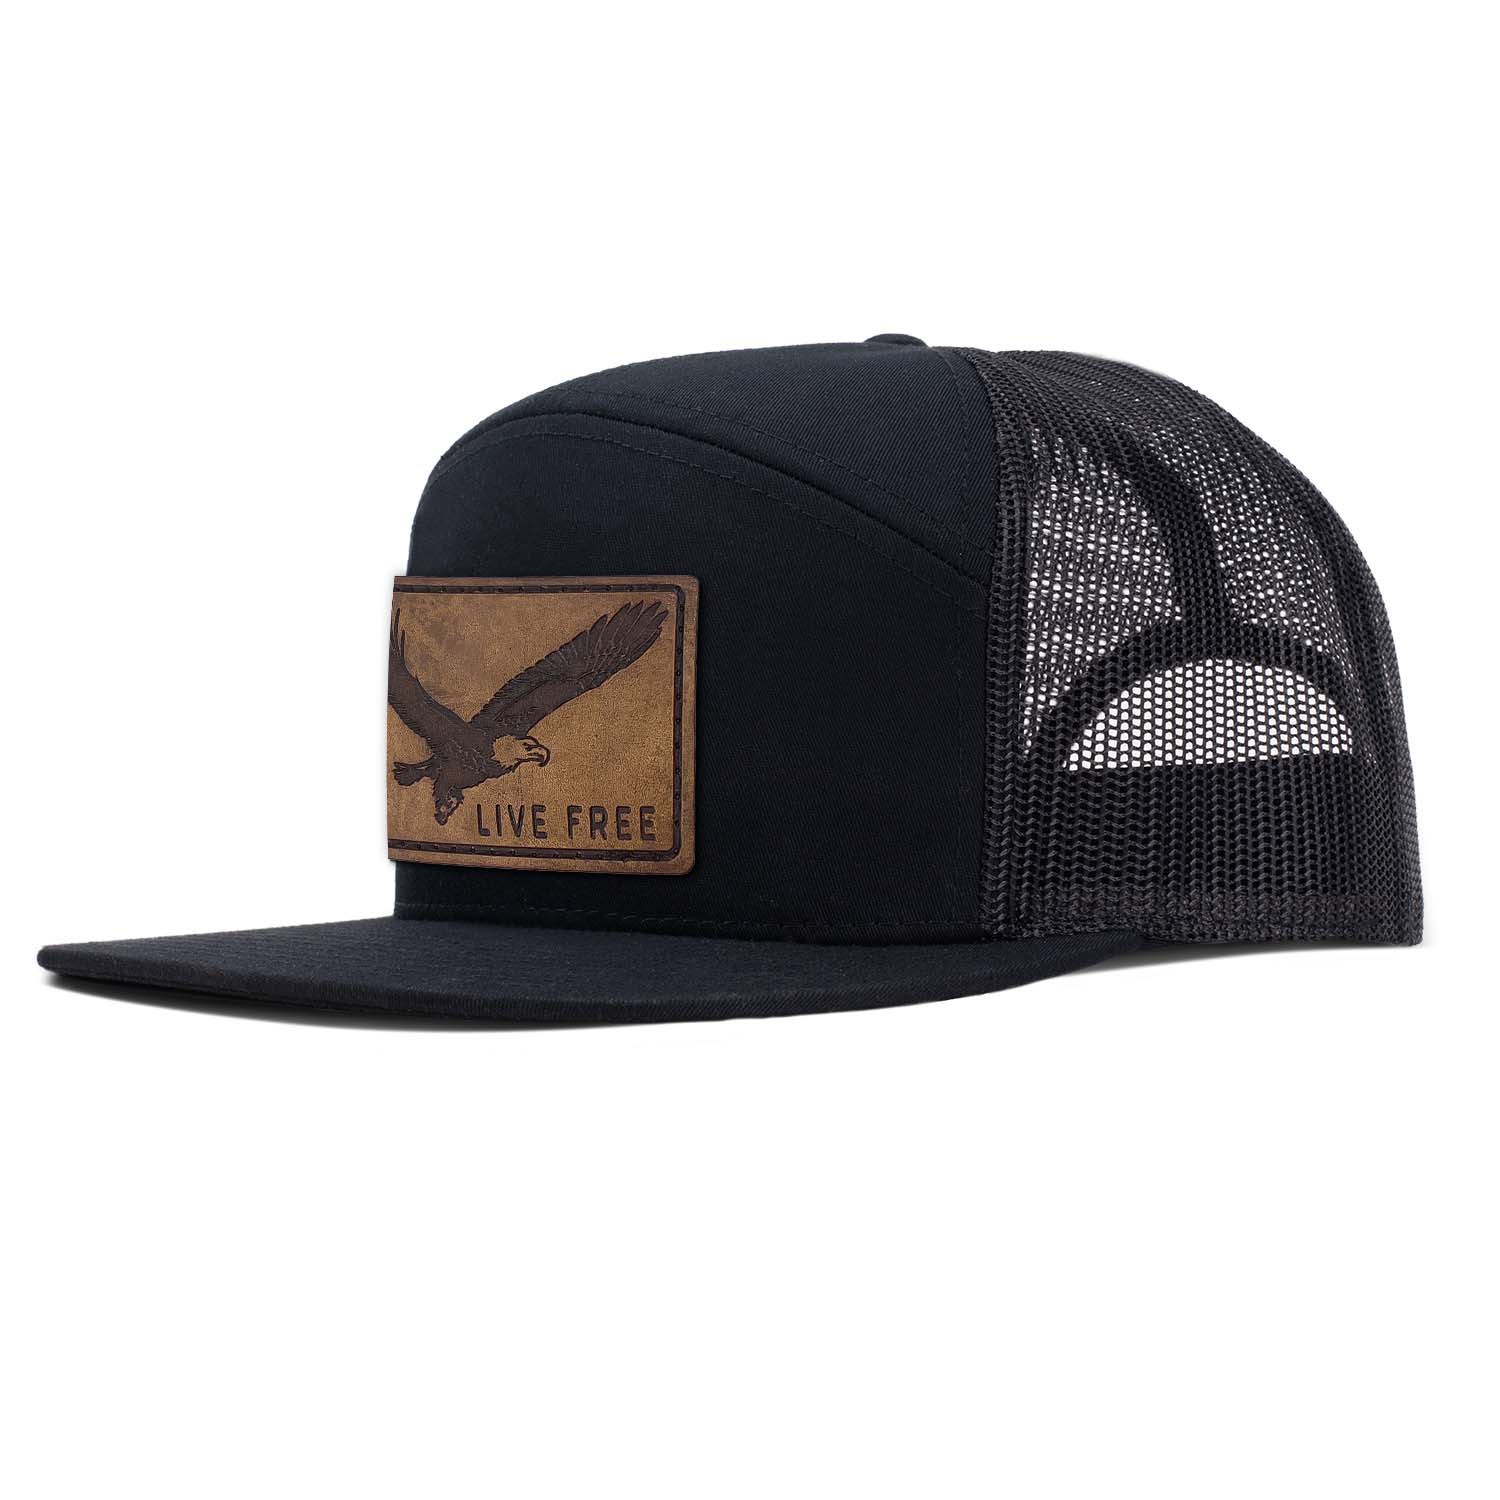 Revolution Mfg black with black mesh 7 panel trucker featuring our full grain leather antique finish Live Free patch on the seamless front panel.